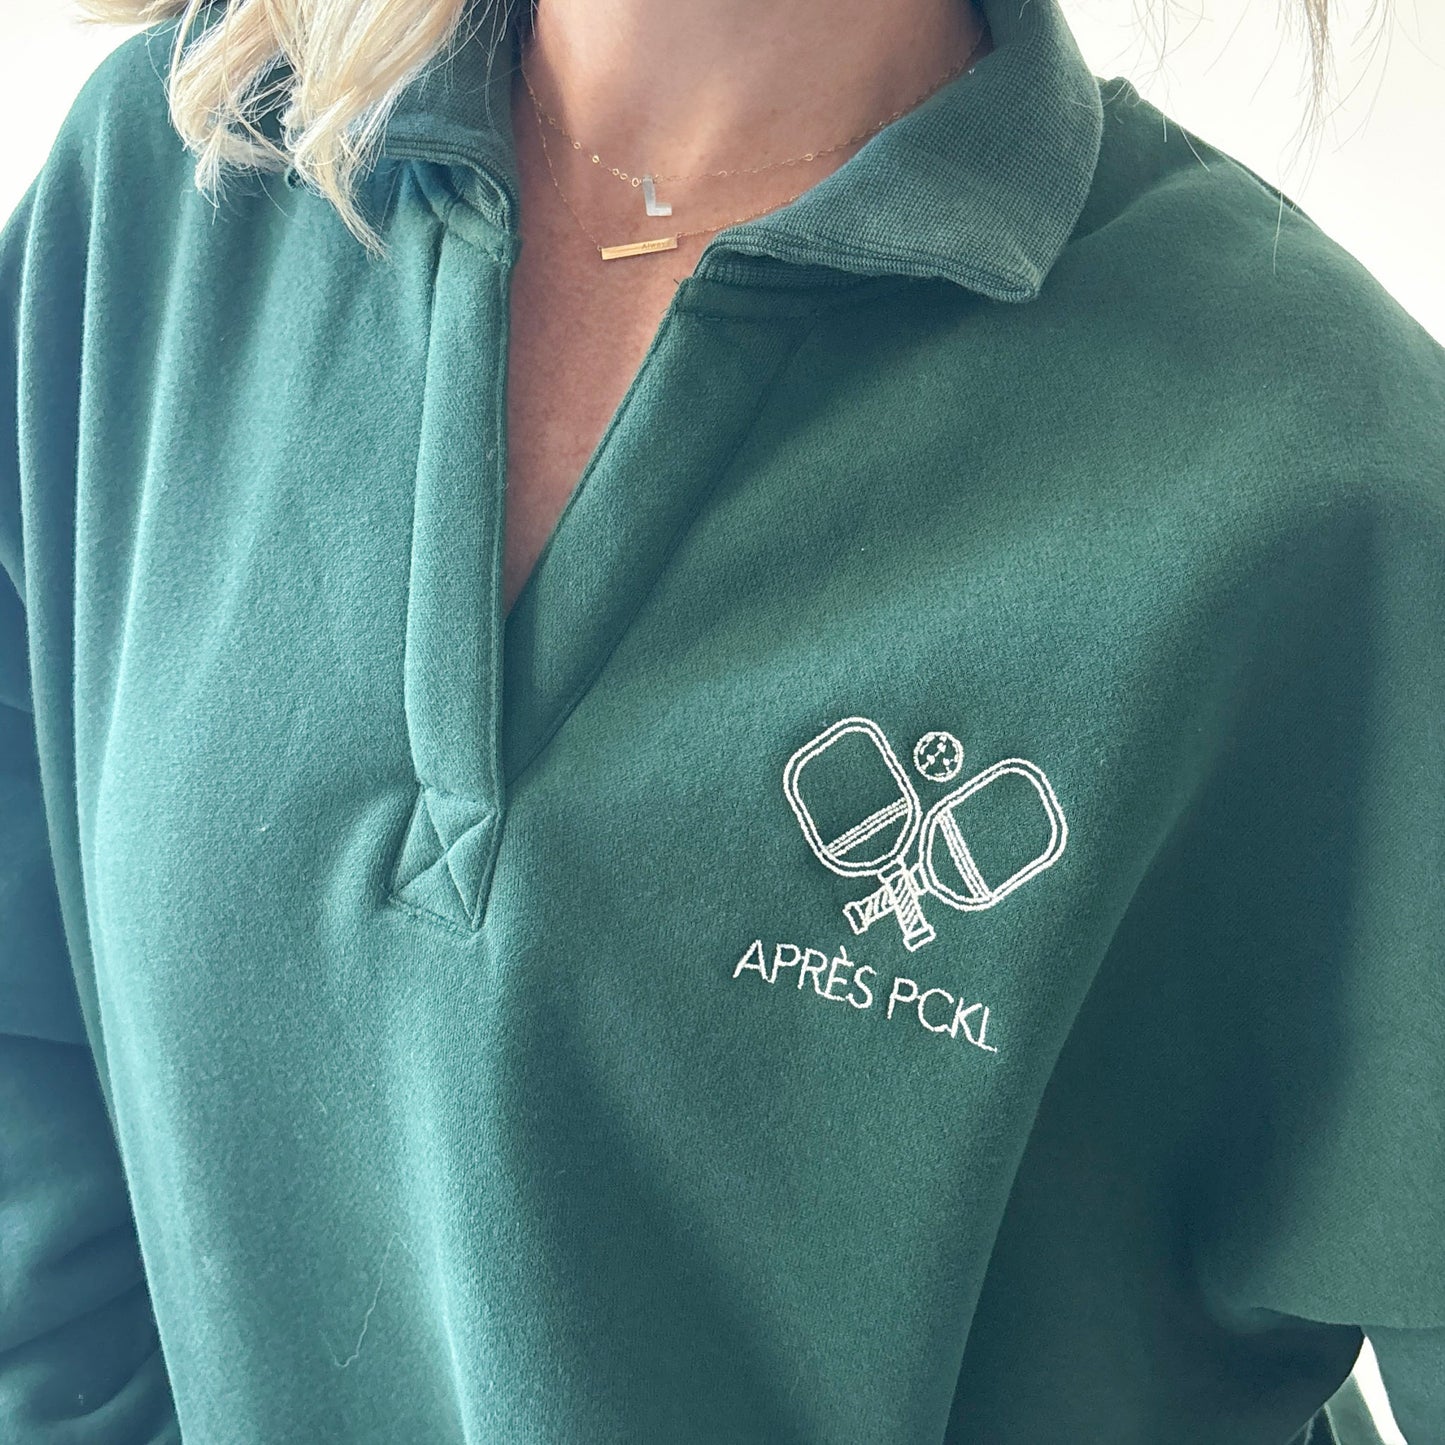 Heather oatmeal oversized collared sweatshirt with après pckl pickleball paddle embroidery